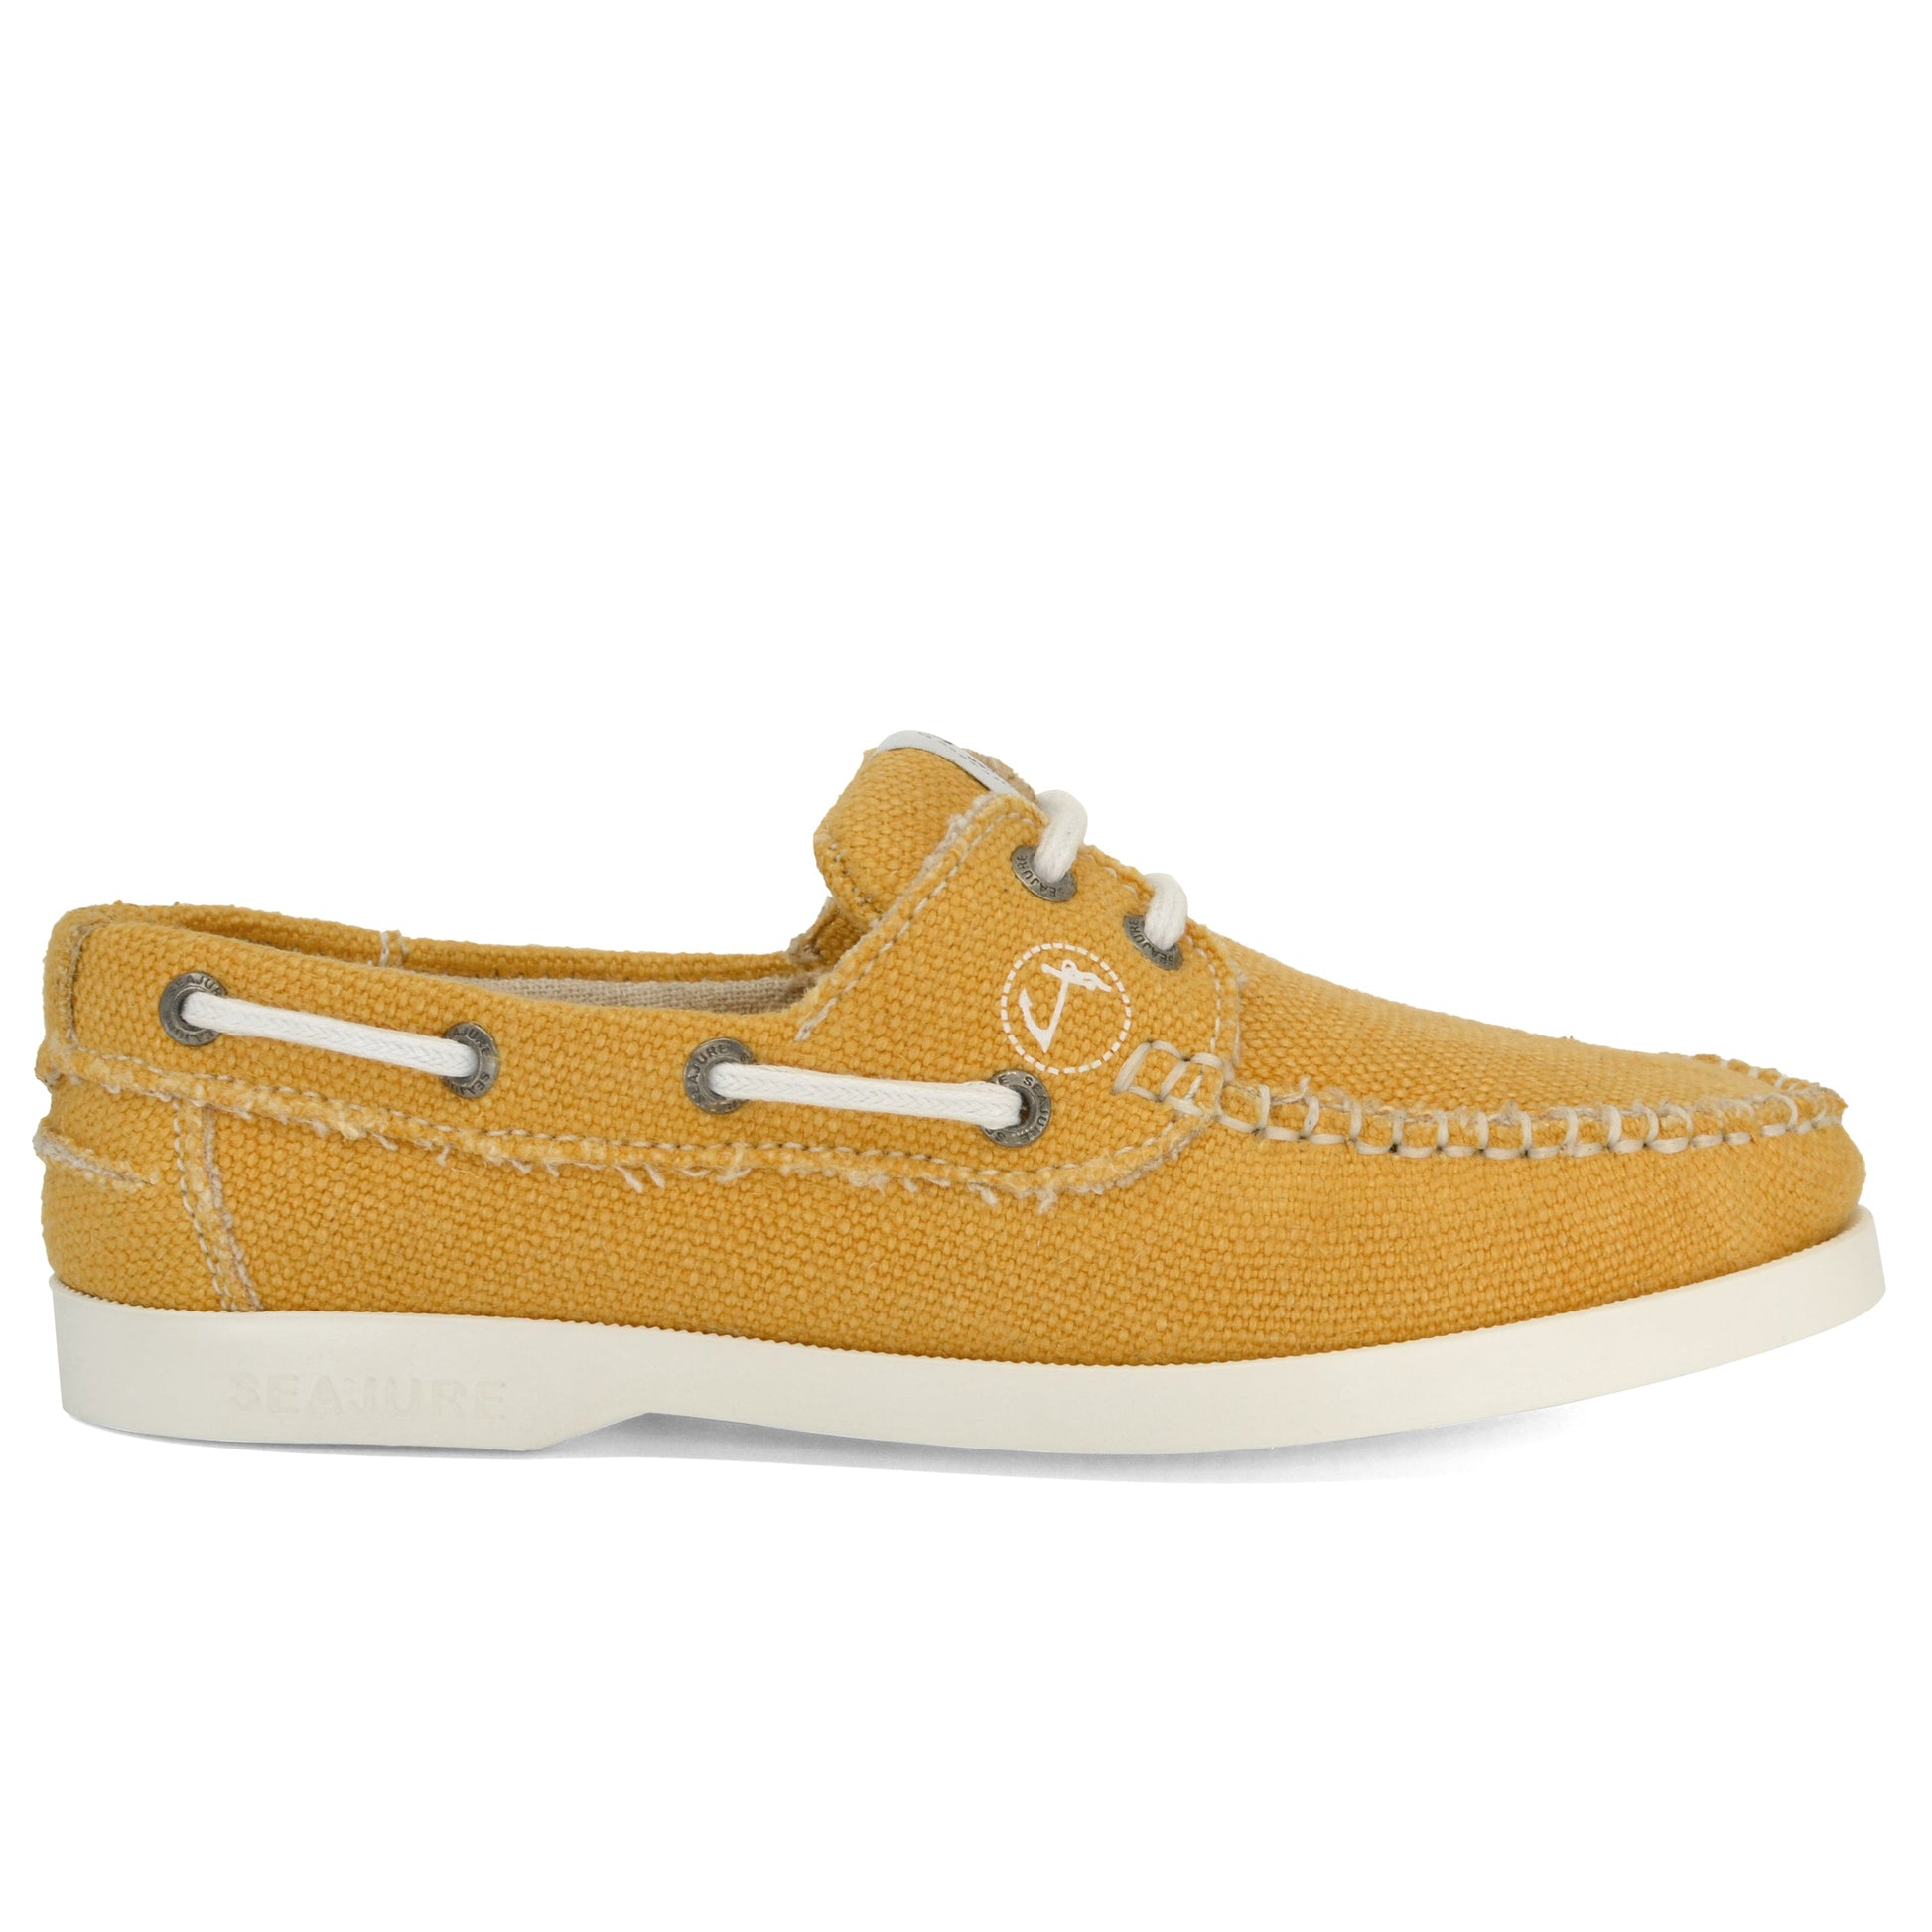 Discover the Amethyst Hestia Women Hemp & Vegan Boat Shoe Saharun: a single yellow shoe with white stitching and laces, featuring a white rubber sole and a small logo embroidered on the side. Crafted with premium hemp for ultimate sustainability, it embodies eco-friendly fashion without compromising on style.